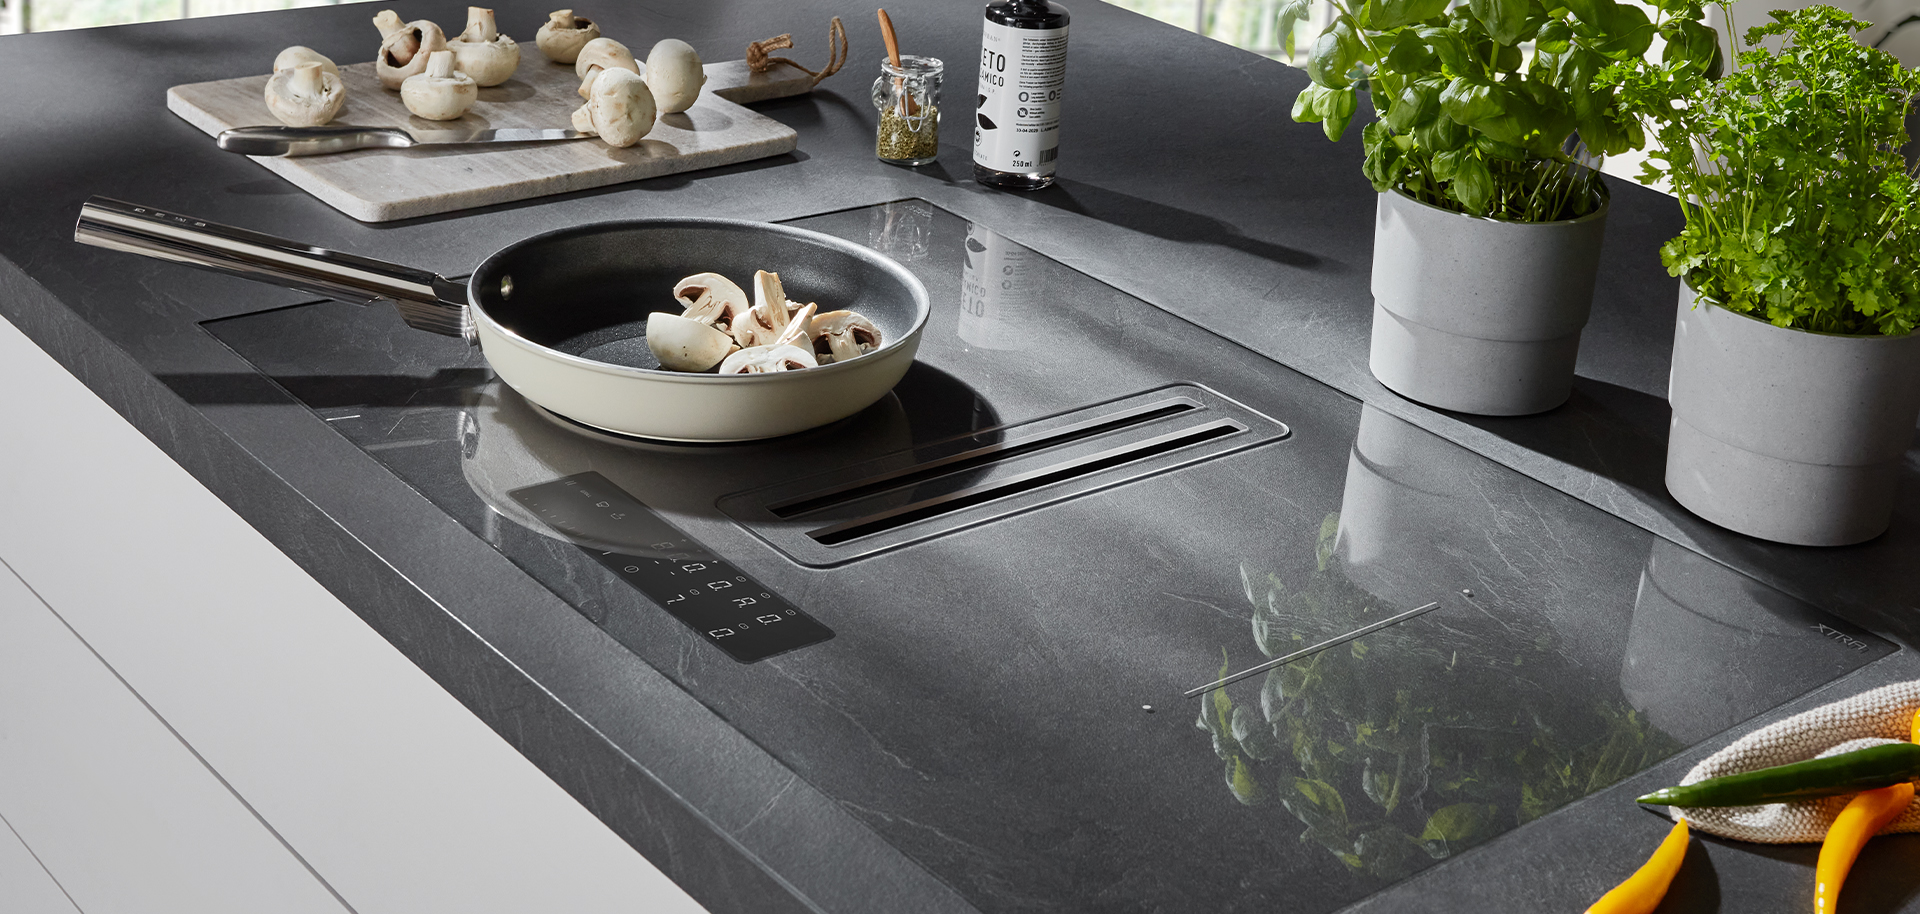 A modern kitchen countertop featuring an induction cooktop with a pan of mushrooms, surrounded by fresh herbs and sleek, minimalist decor.